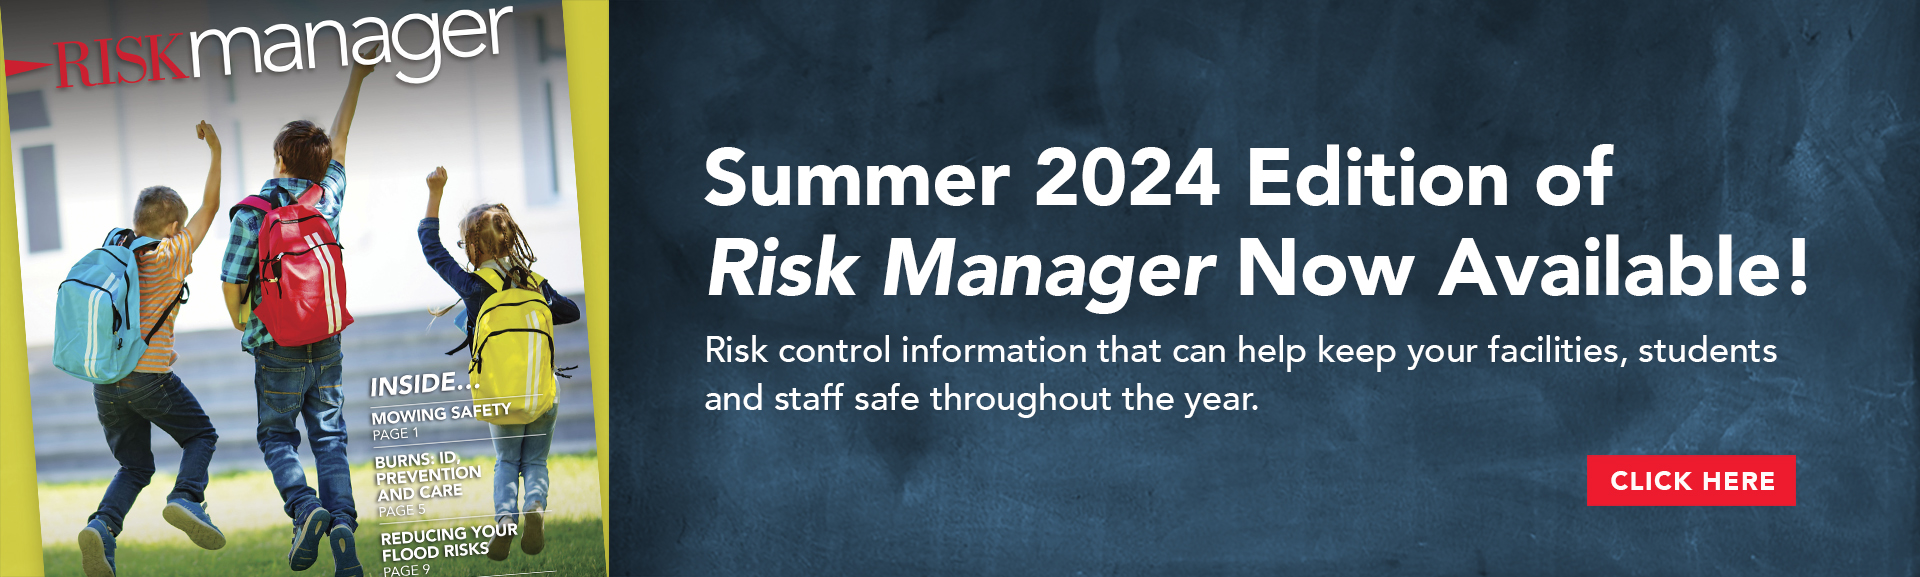 Banner for homepage scroll announcing Risk Manager Summer 2024 is available